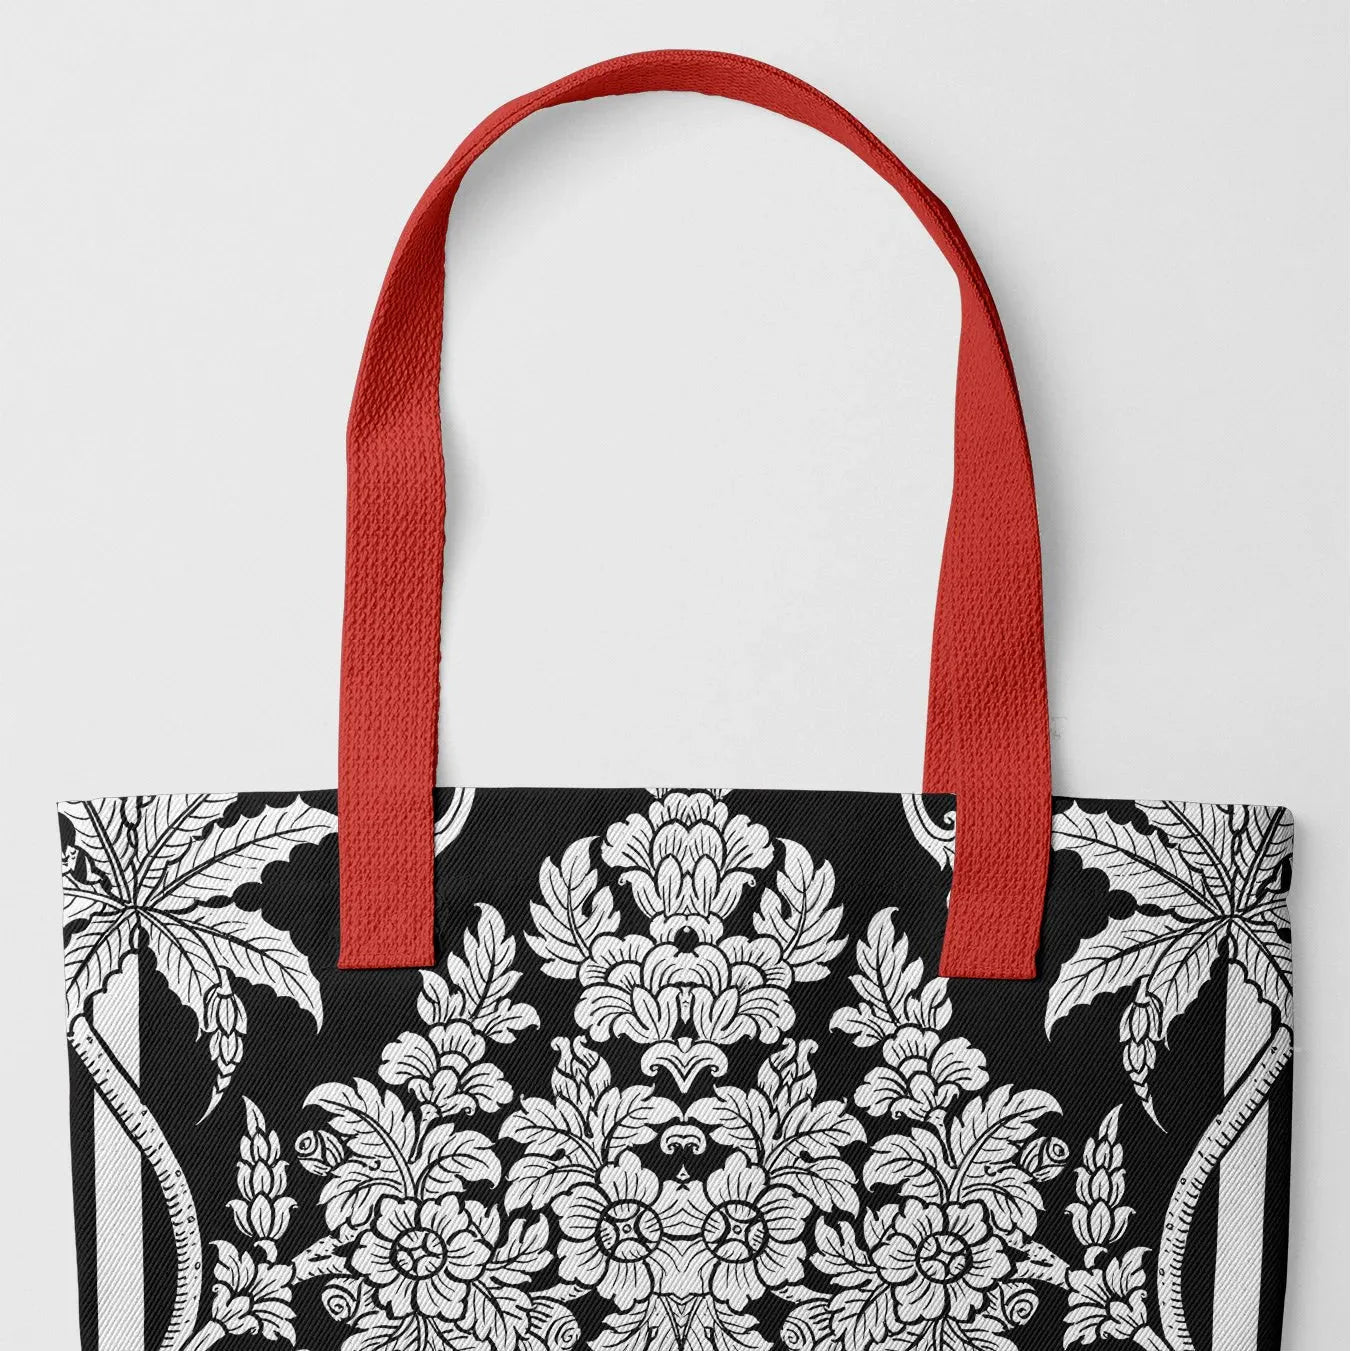 Midnight Oasis Tote Bag - black And White - Heavy Duty Reusable Grocery Bag - Red Handles - Shopping Totes - Aesthetic